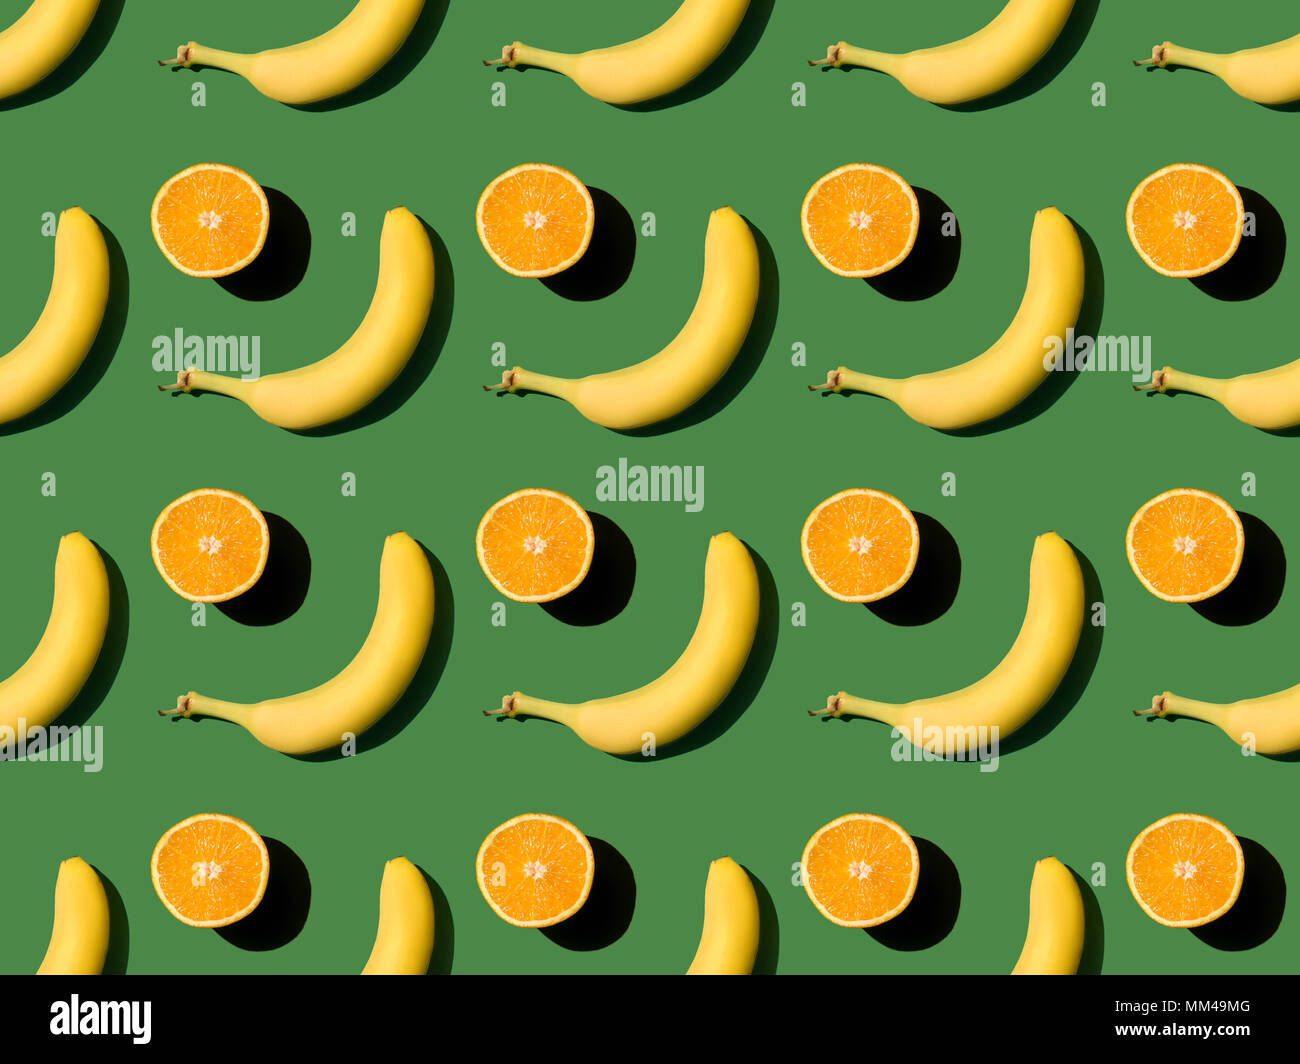 pattern with bananas and oranges  Stock Photo